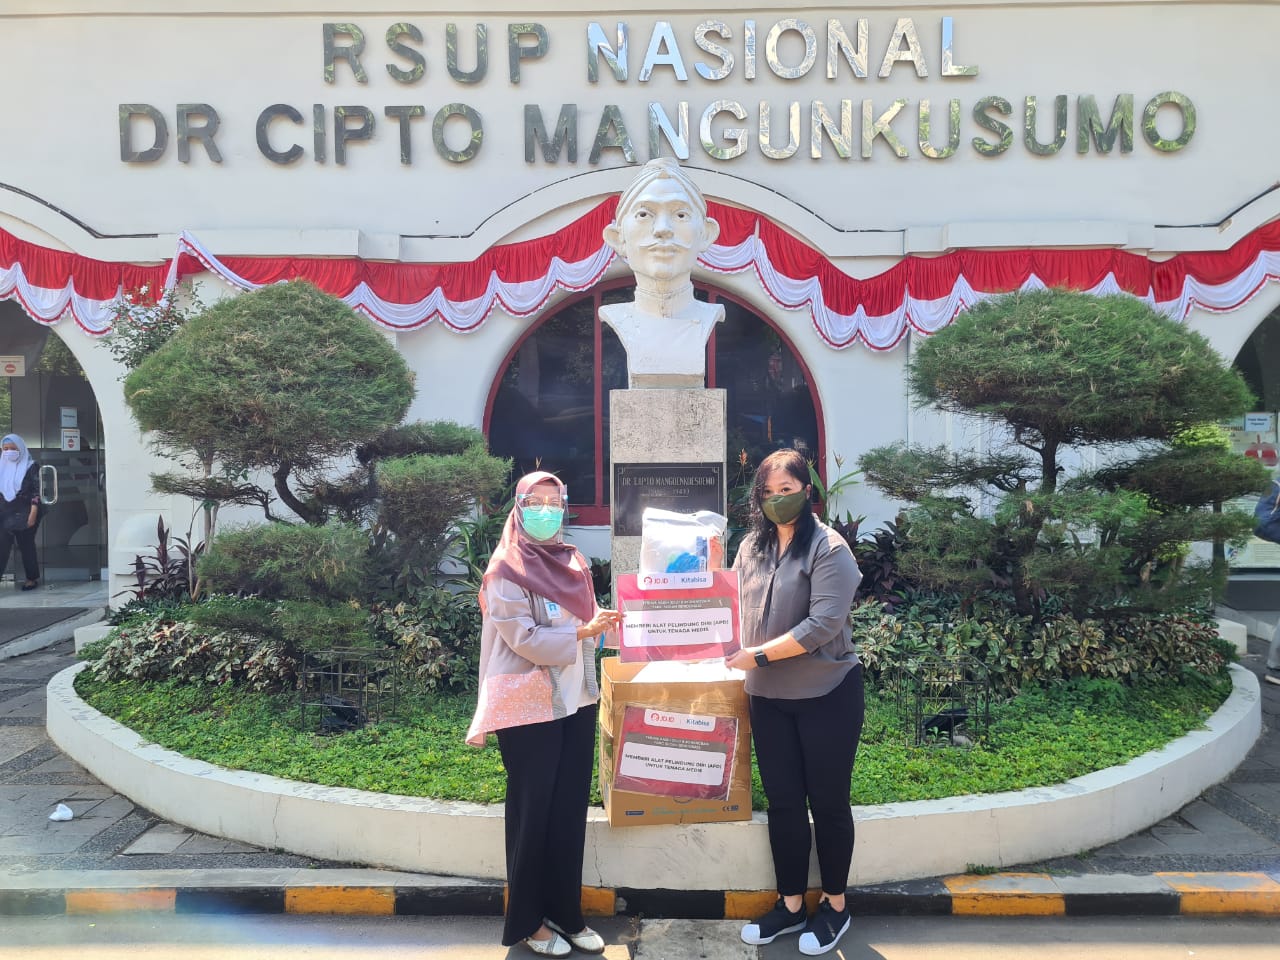 PPE distribution to local hospital in Indonesia on September 5th.